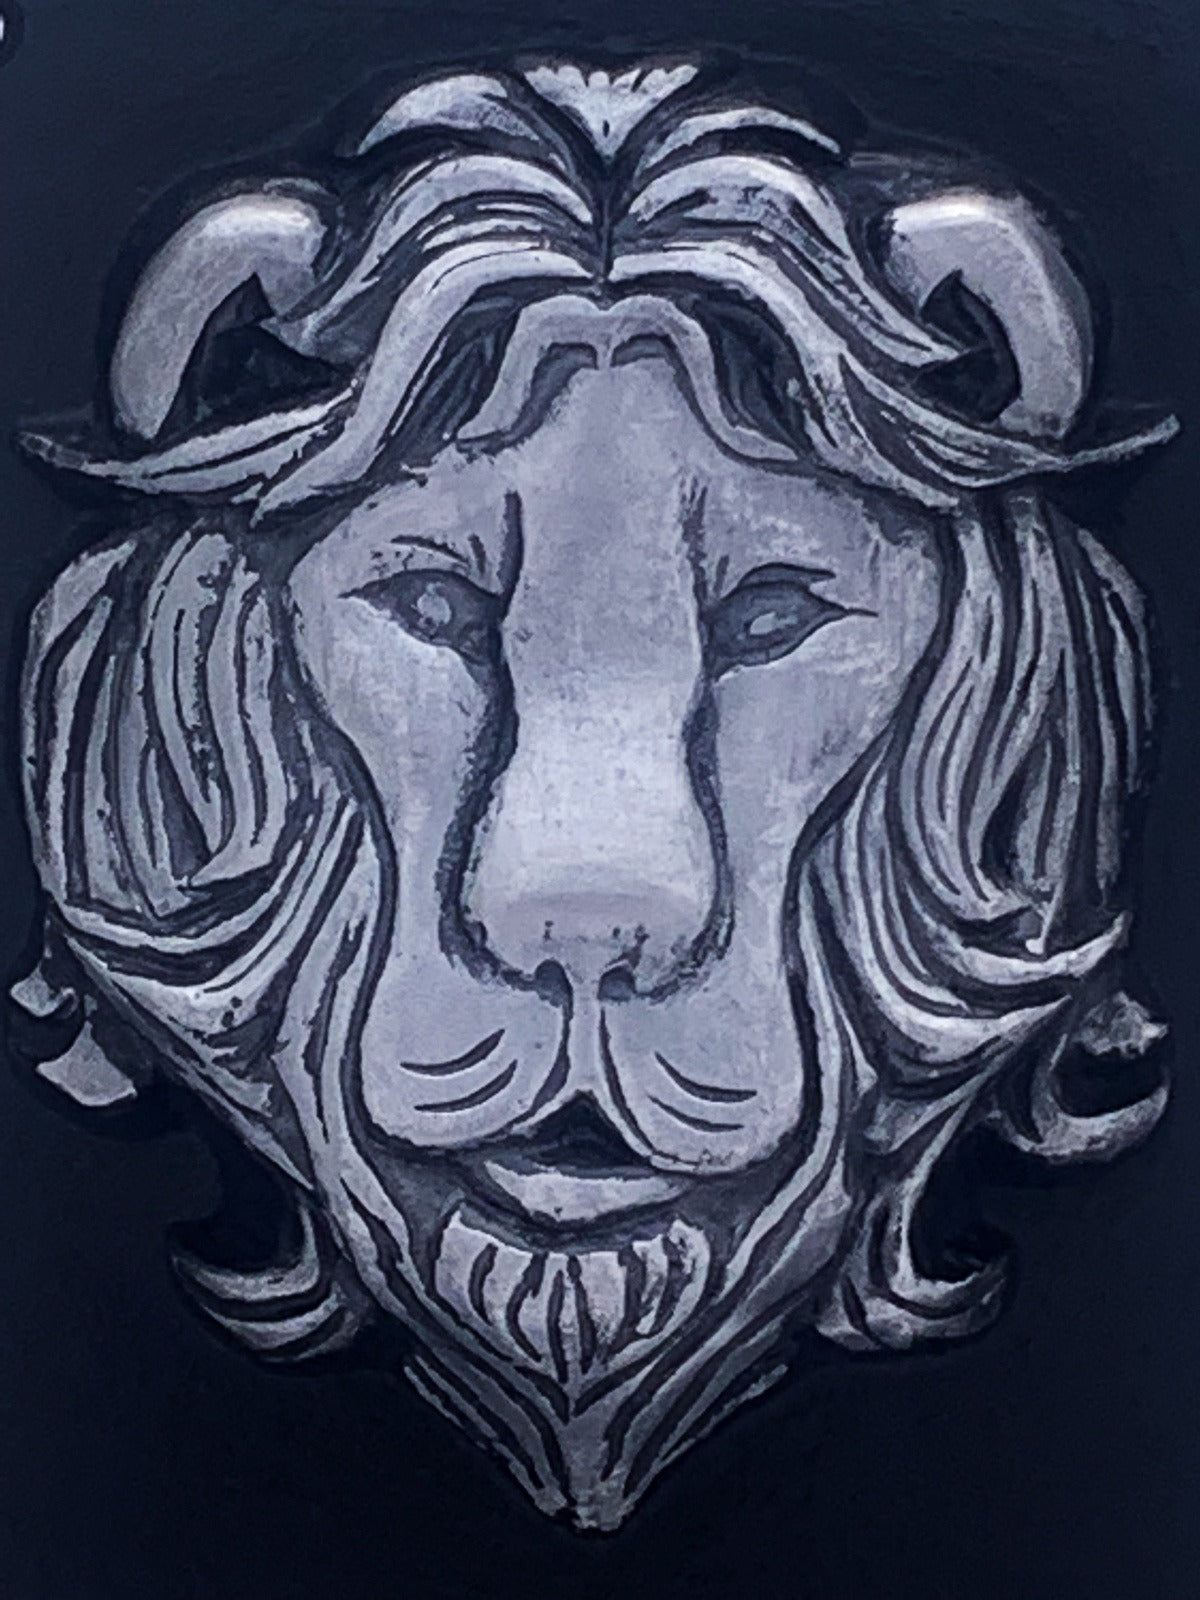 House Number Sign with Lion